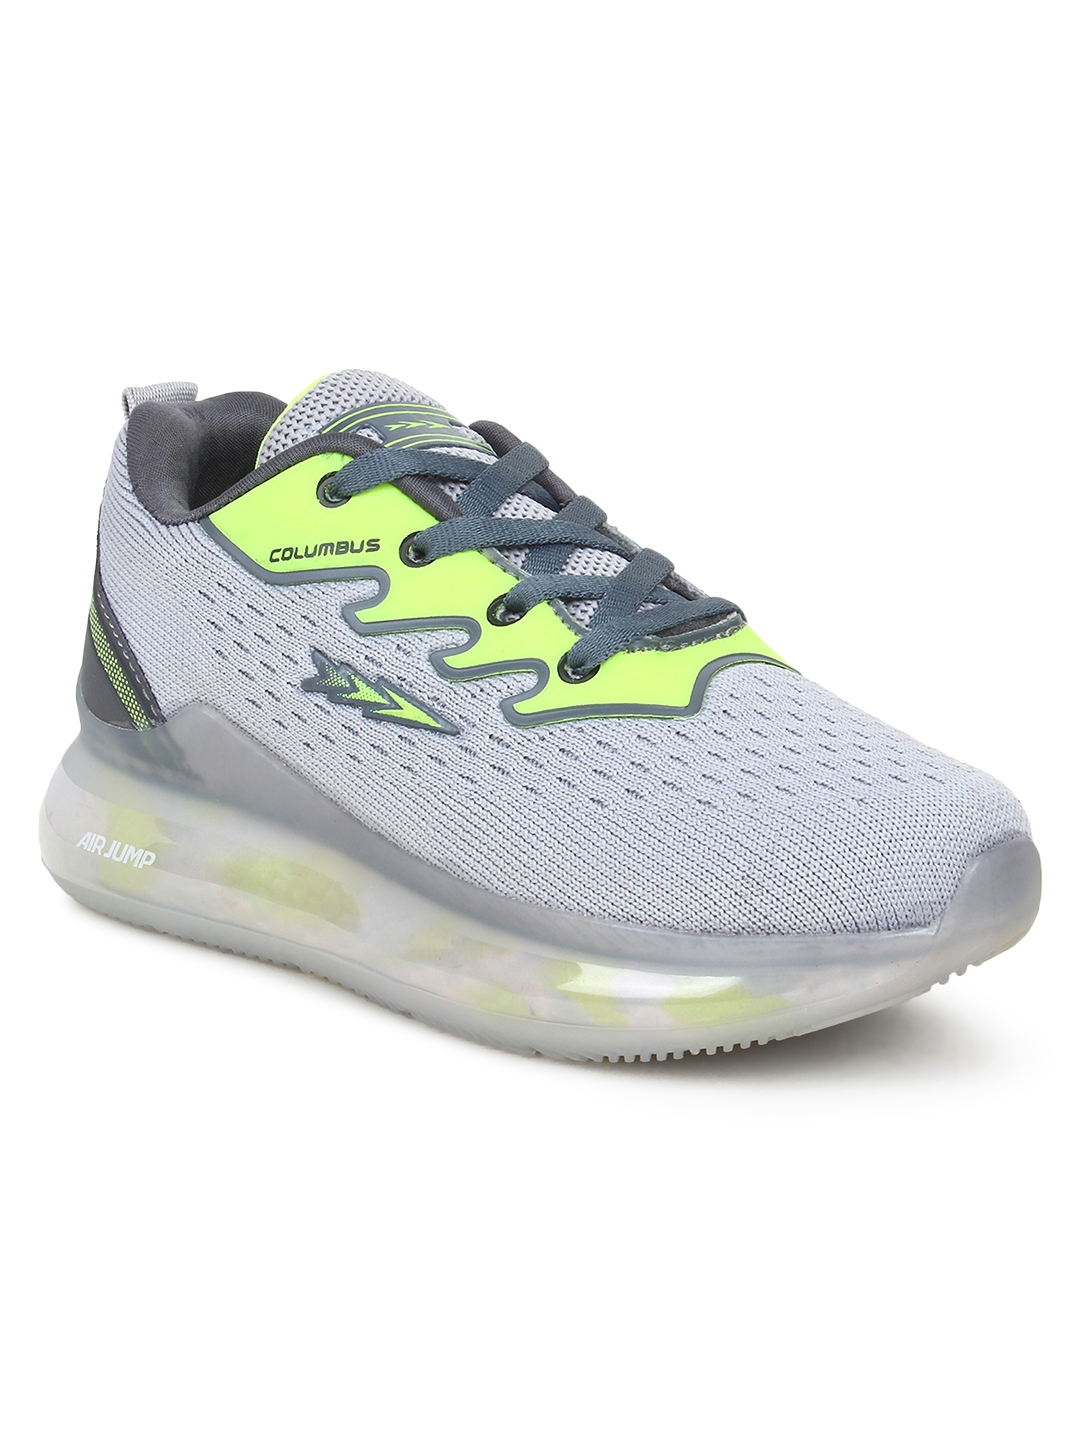 Columbus Sports | Columbus ELEVATE-L.GREY P.GREEN Running Shoes For Boys 0